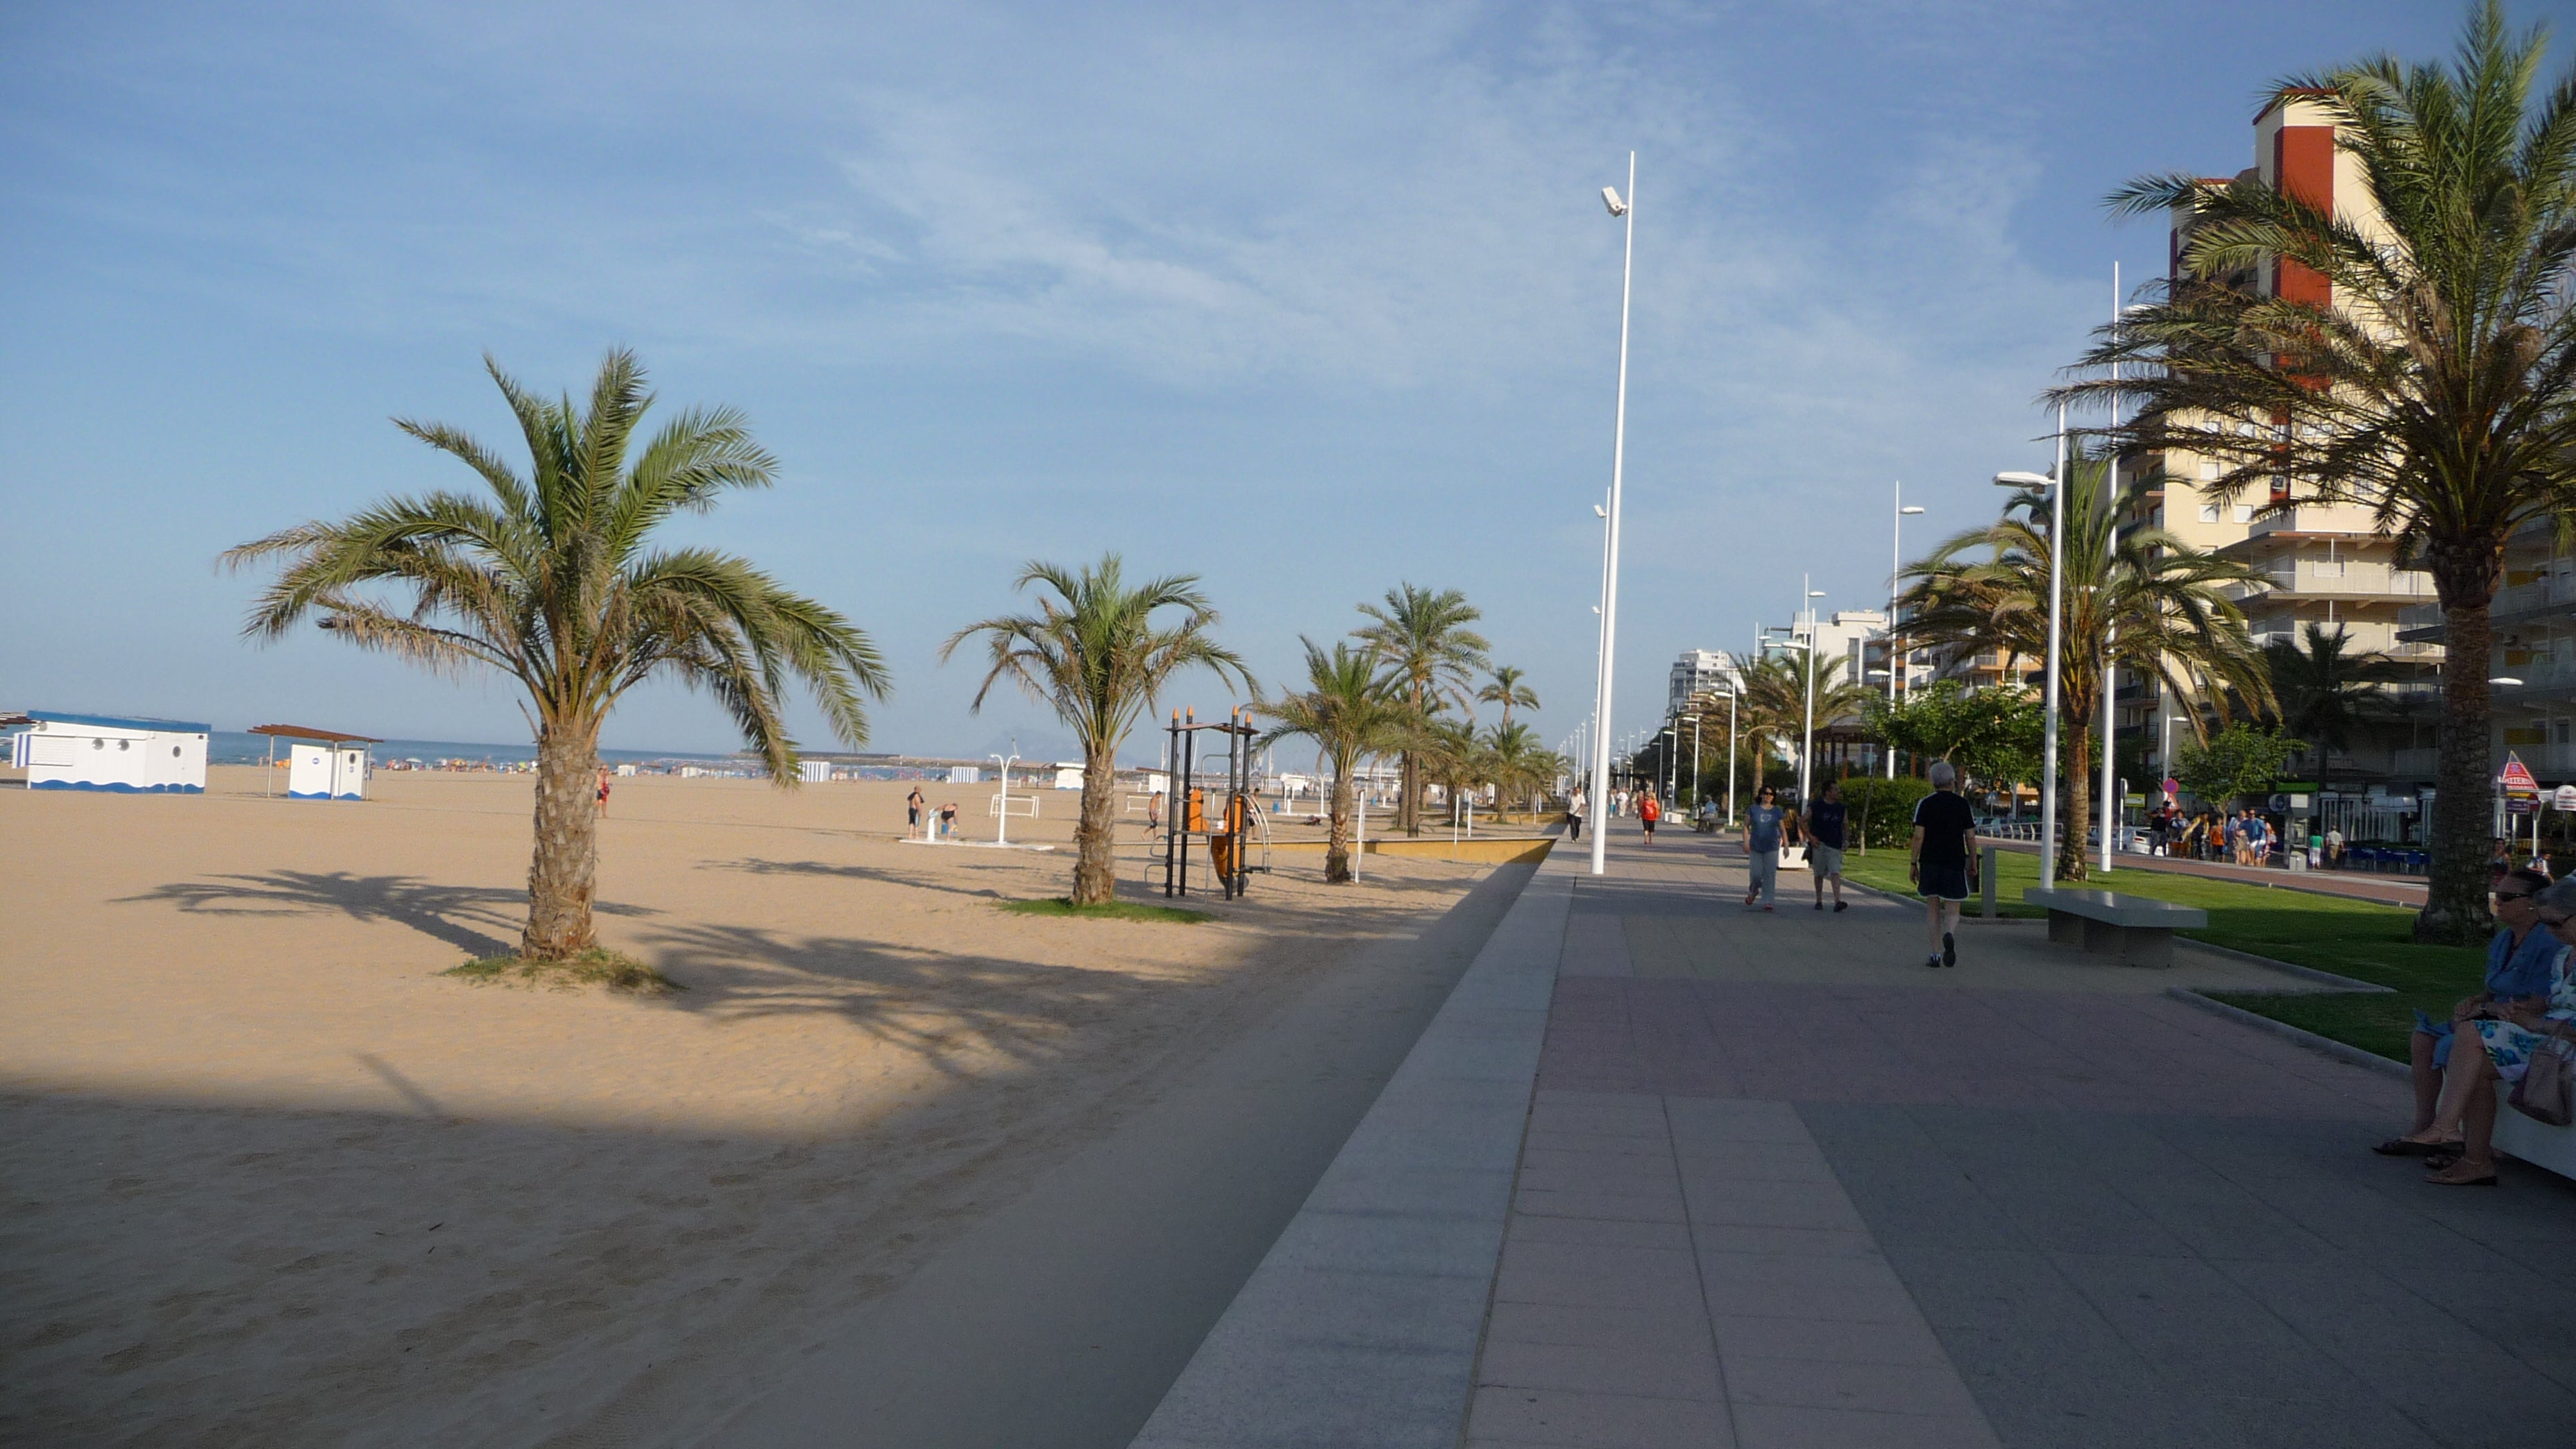 The body parts washed up on Gandia Beach, south of Valencia (file photo)